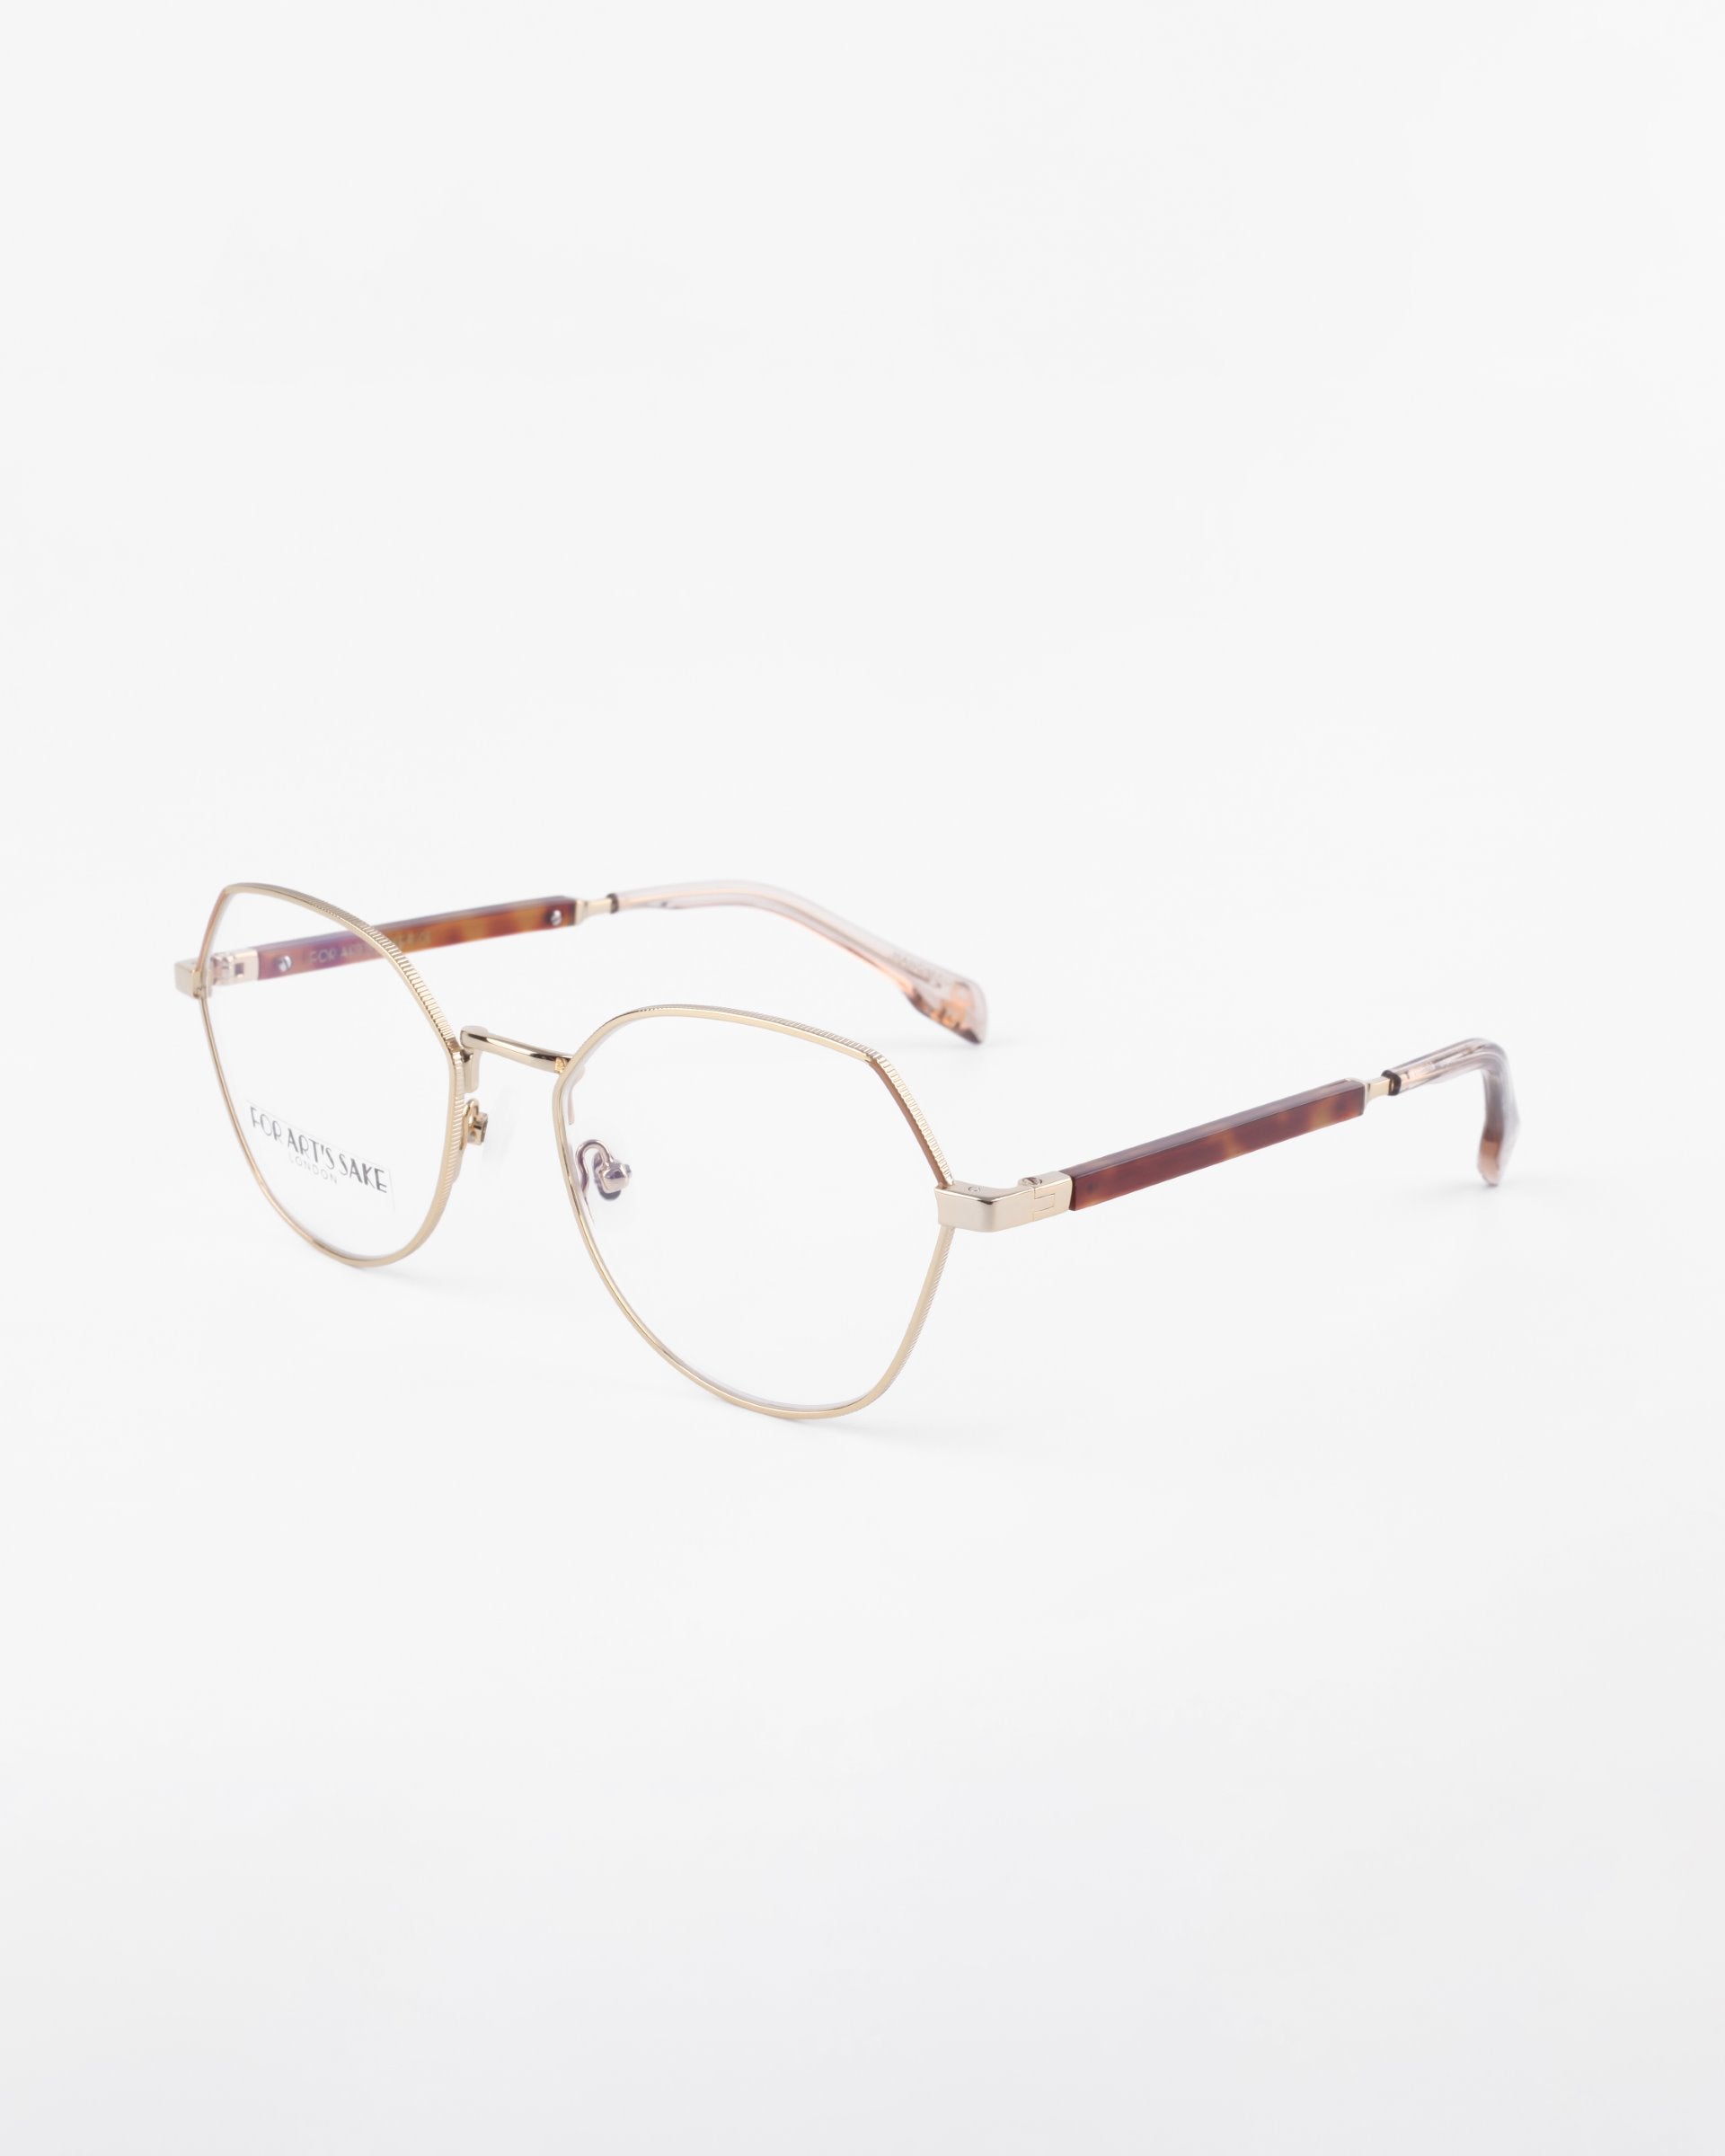 A pair of Orchard eyeglasses by For Art&#39;s Sake® featuring thin, 18-karat gold-plated metal frames. The temples are partly brown with a slightly translucent finish at the ends. The nose pads are clear, and the glasses are set against a white background.